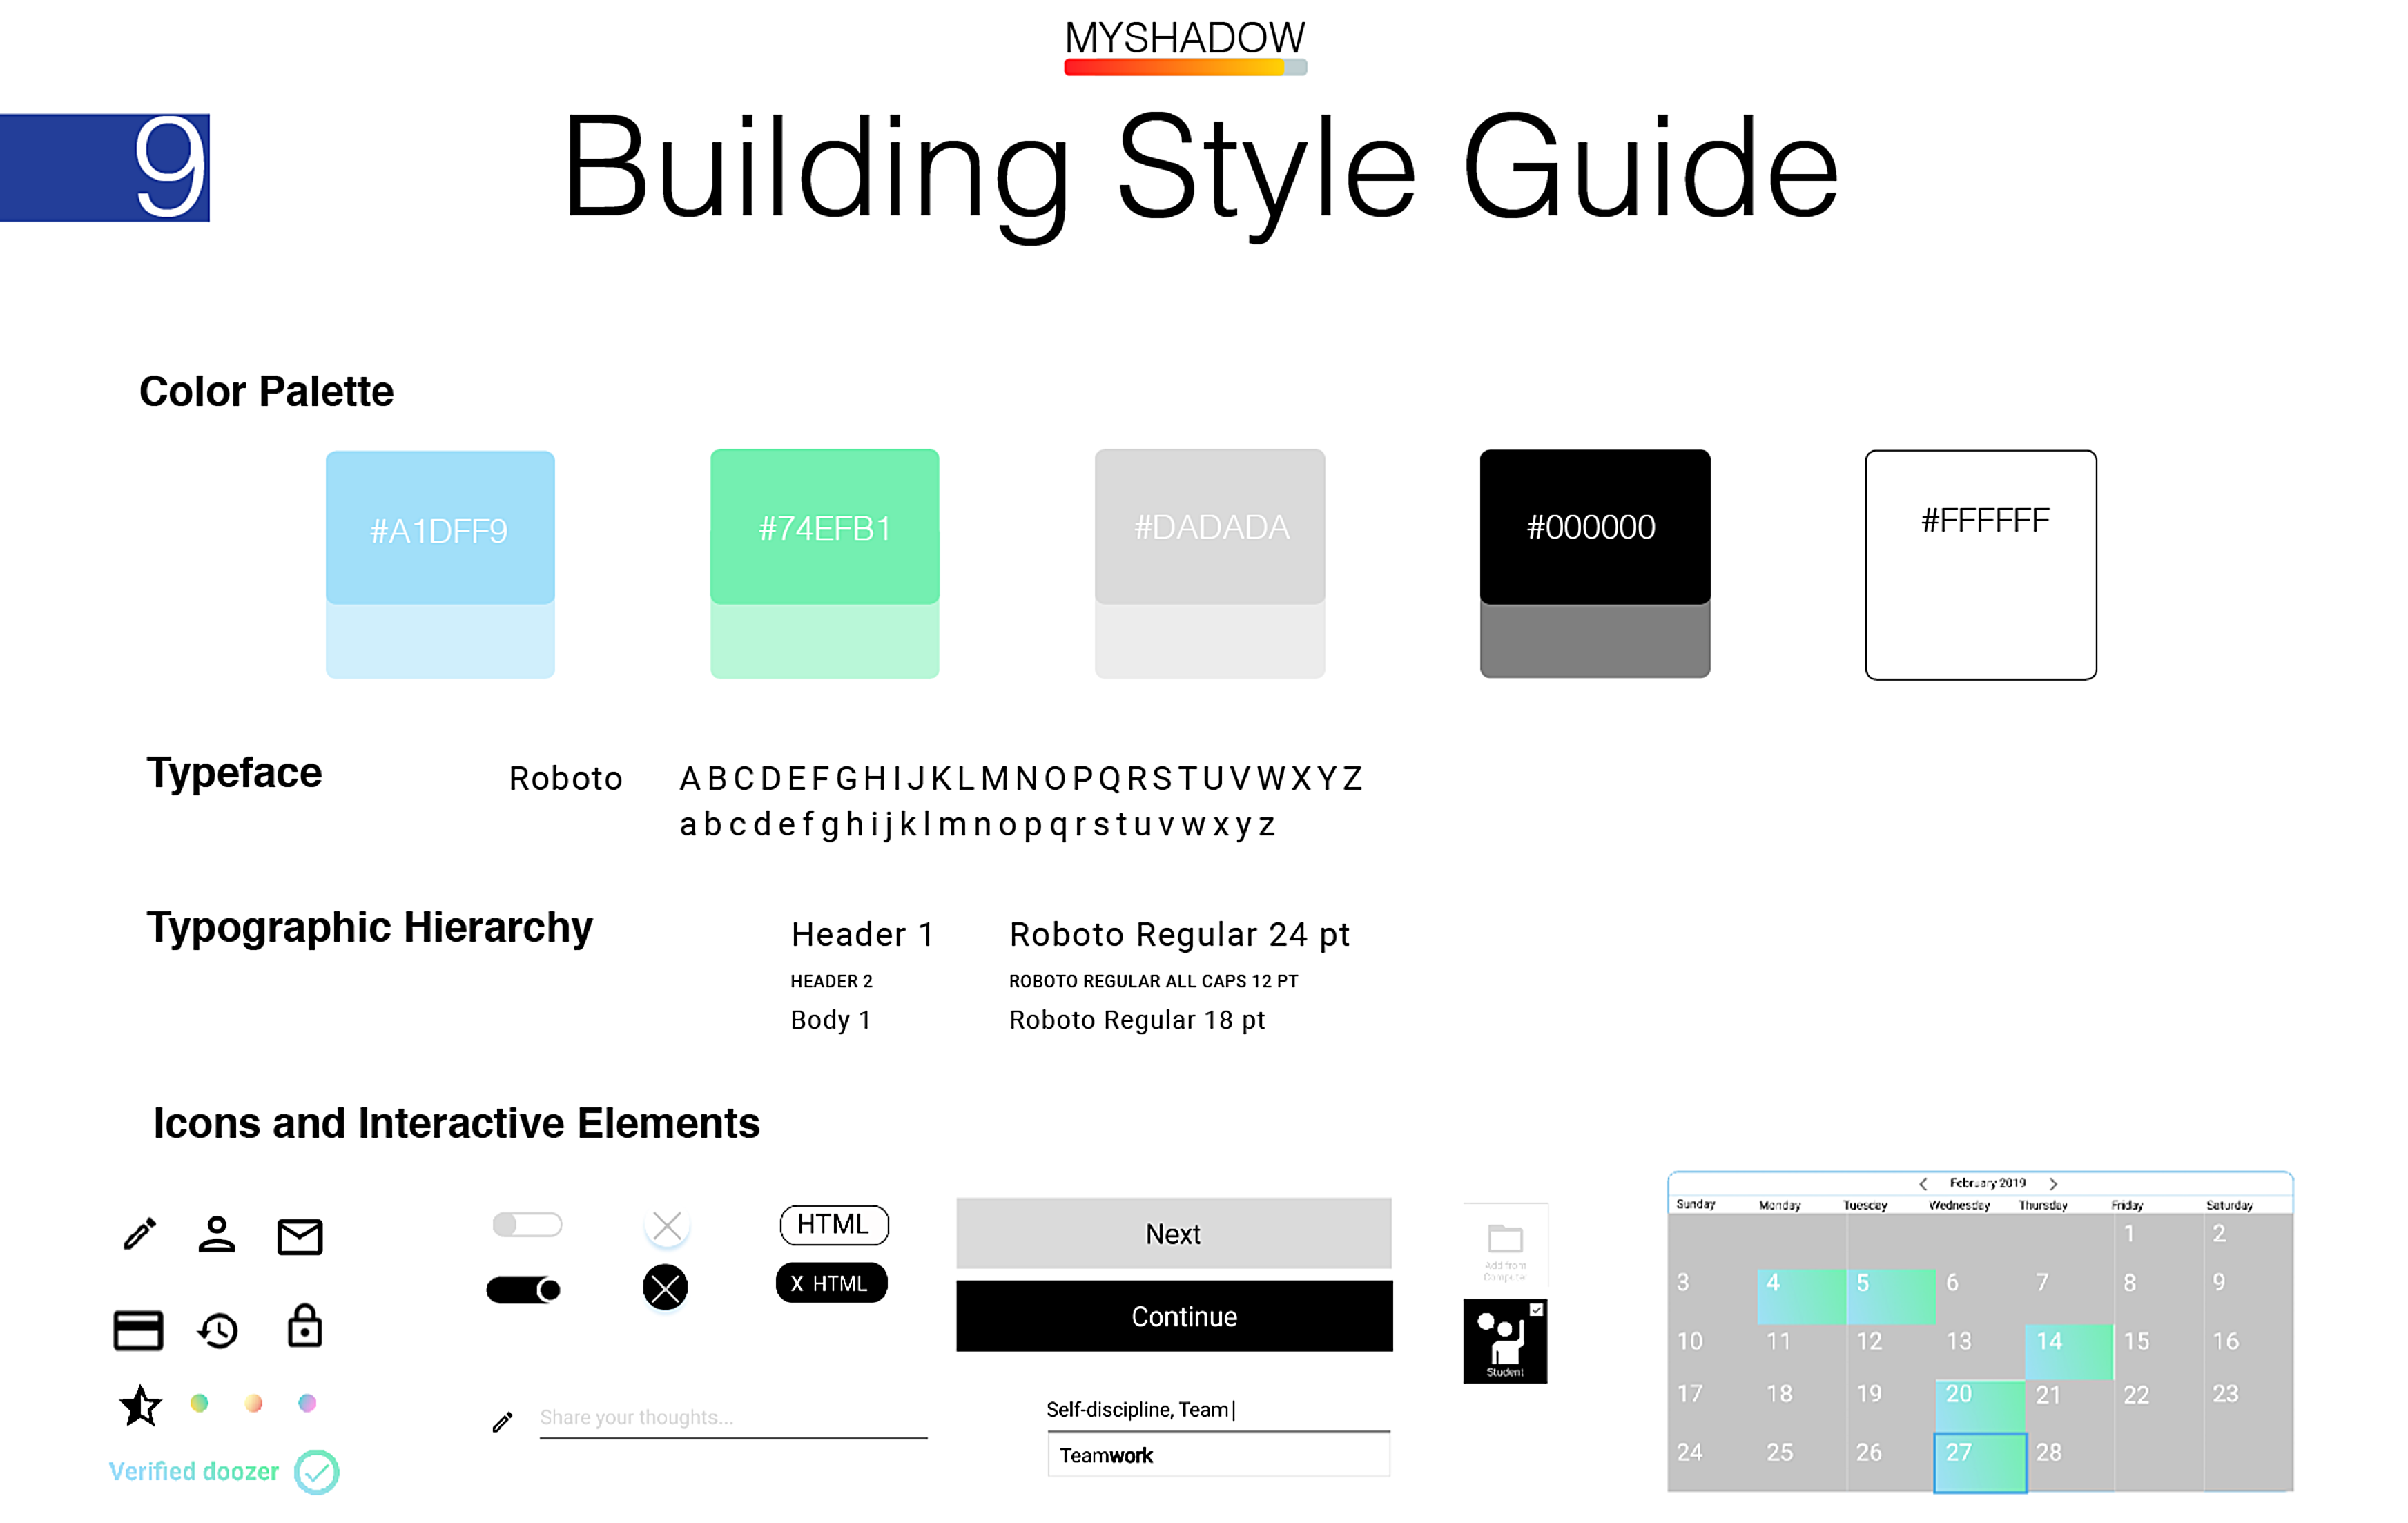 building a style guide to define the brand identity, user interface design, and overall visual language of our product